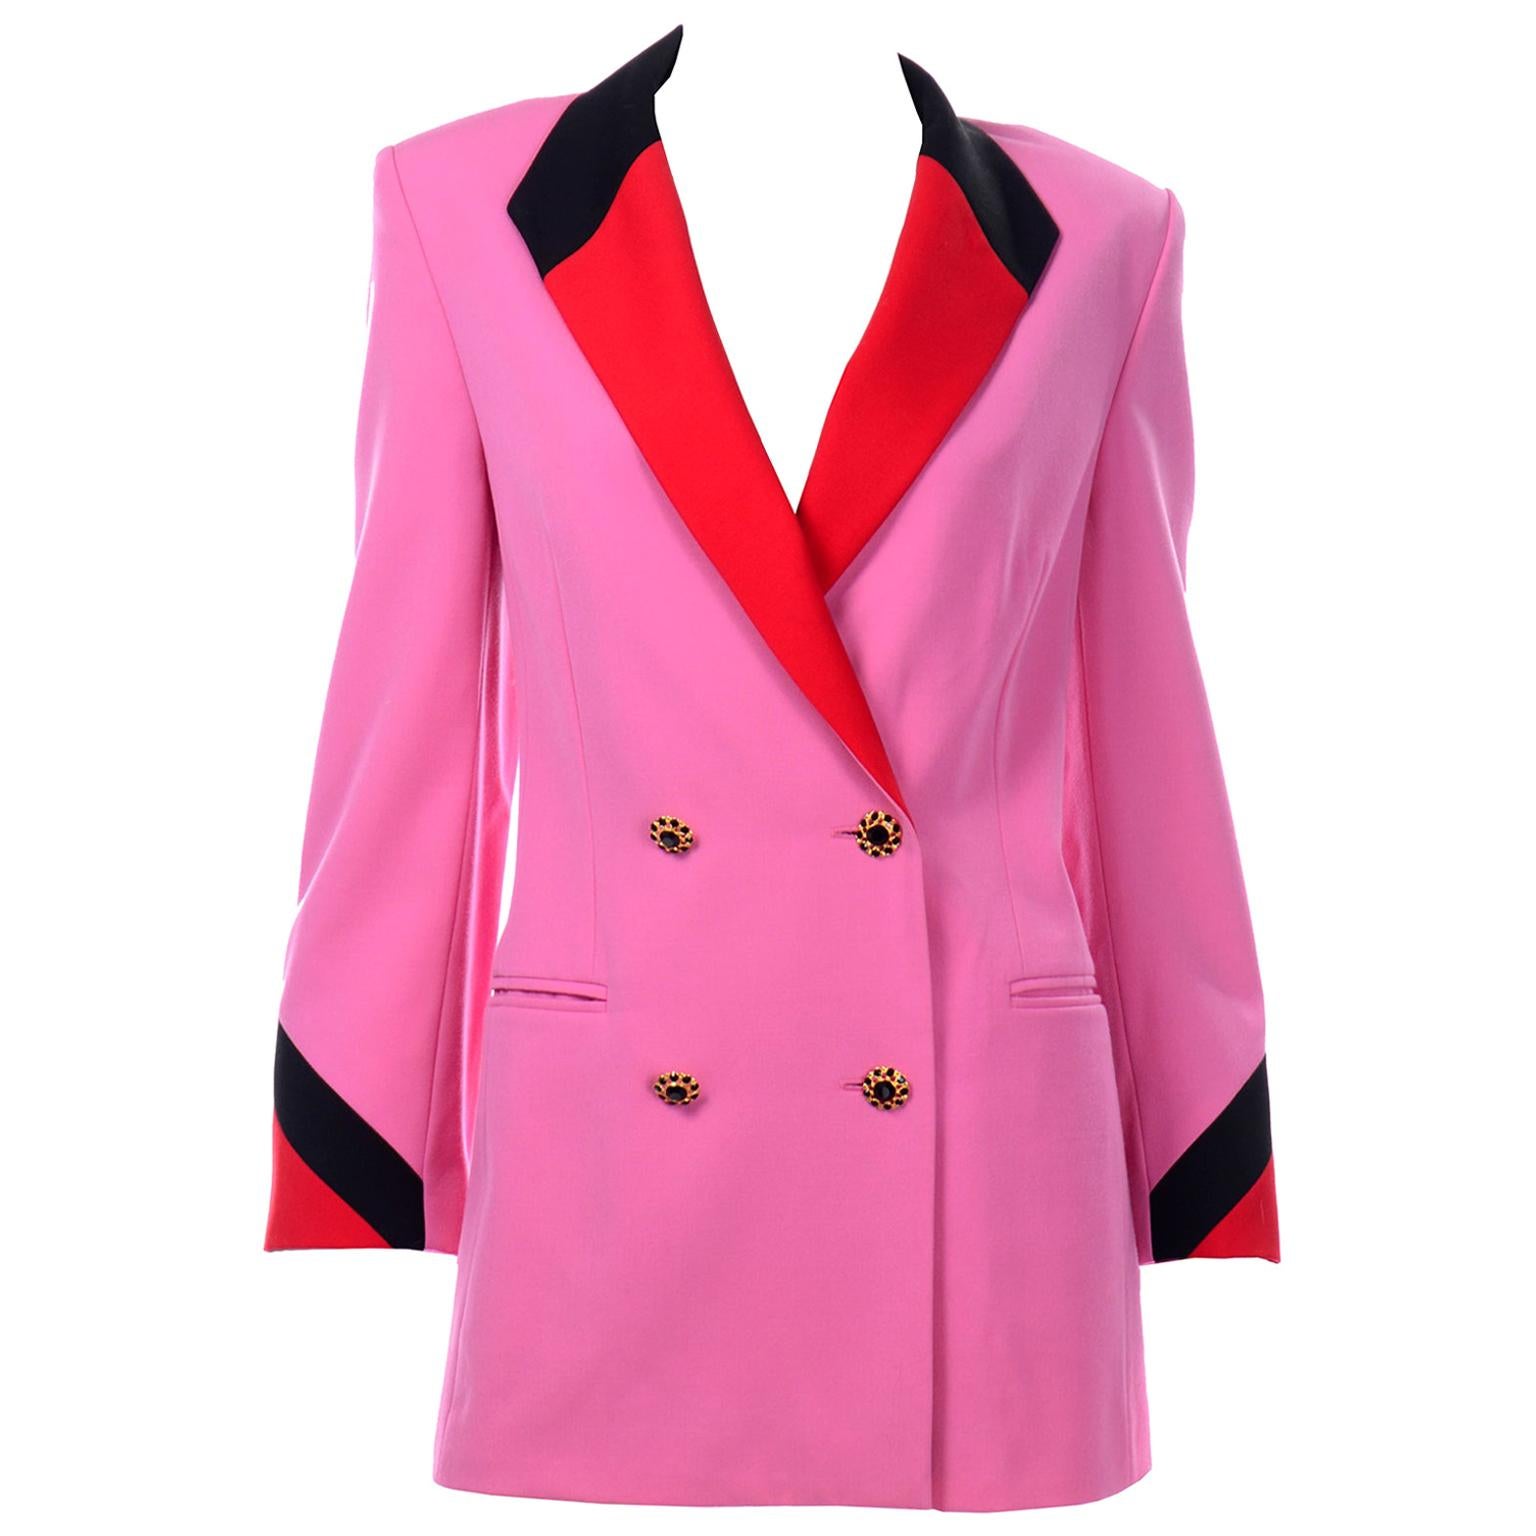 Howe Still Life Cotton Color Block Blazer in Cast Iron-NWT-RP $149.00 